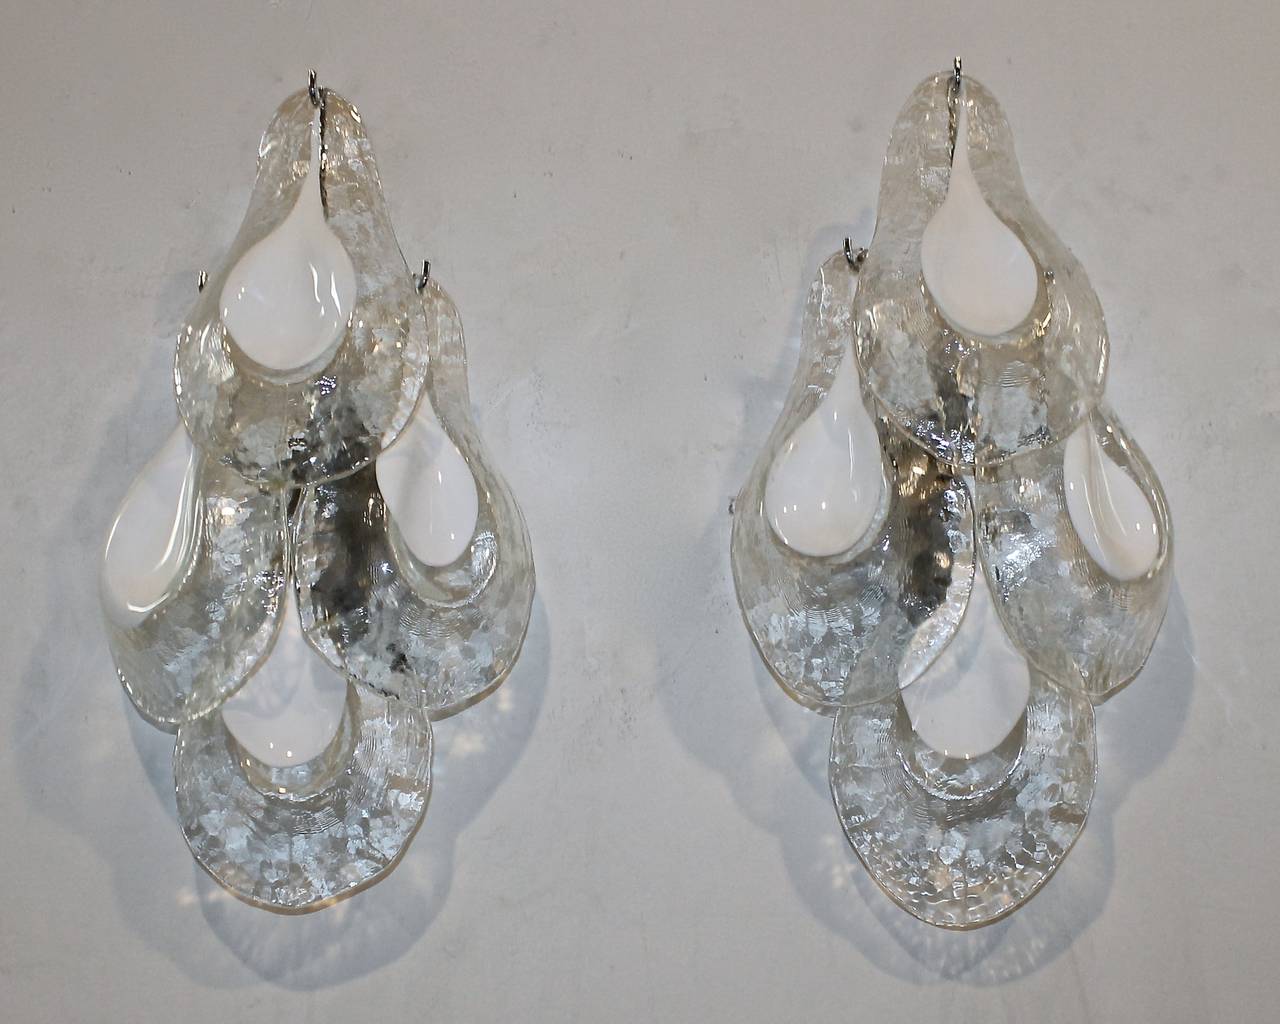 Pair of Italian Mazzega glass clear and white glass tear drop wall sconces with chromed metal backplates, newly wired. Each sconce uses 2 - 40 watt max candelabra base bulbs. Later added white painted backplates for US installation can be painted to